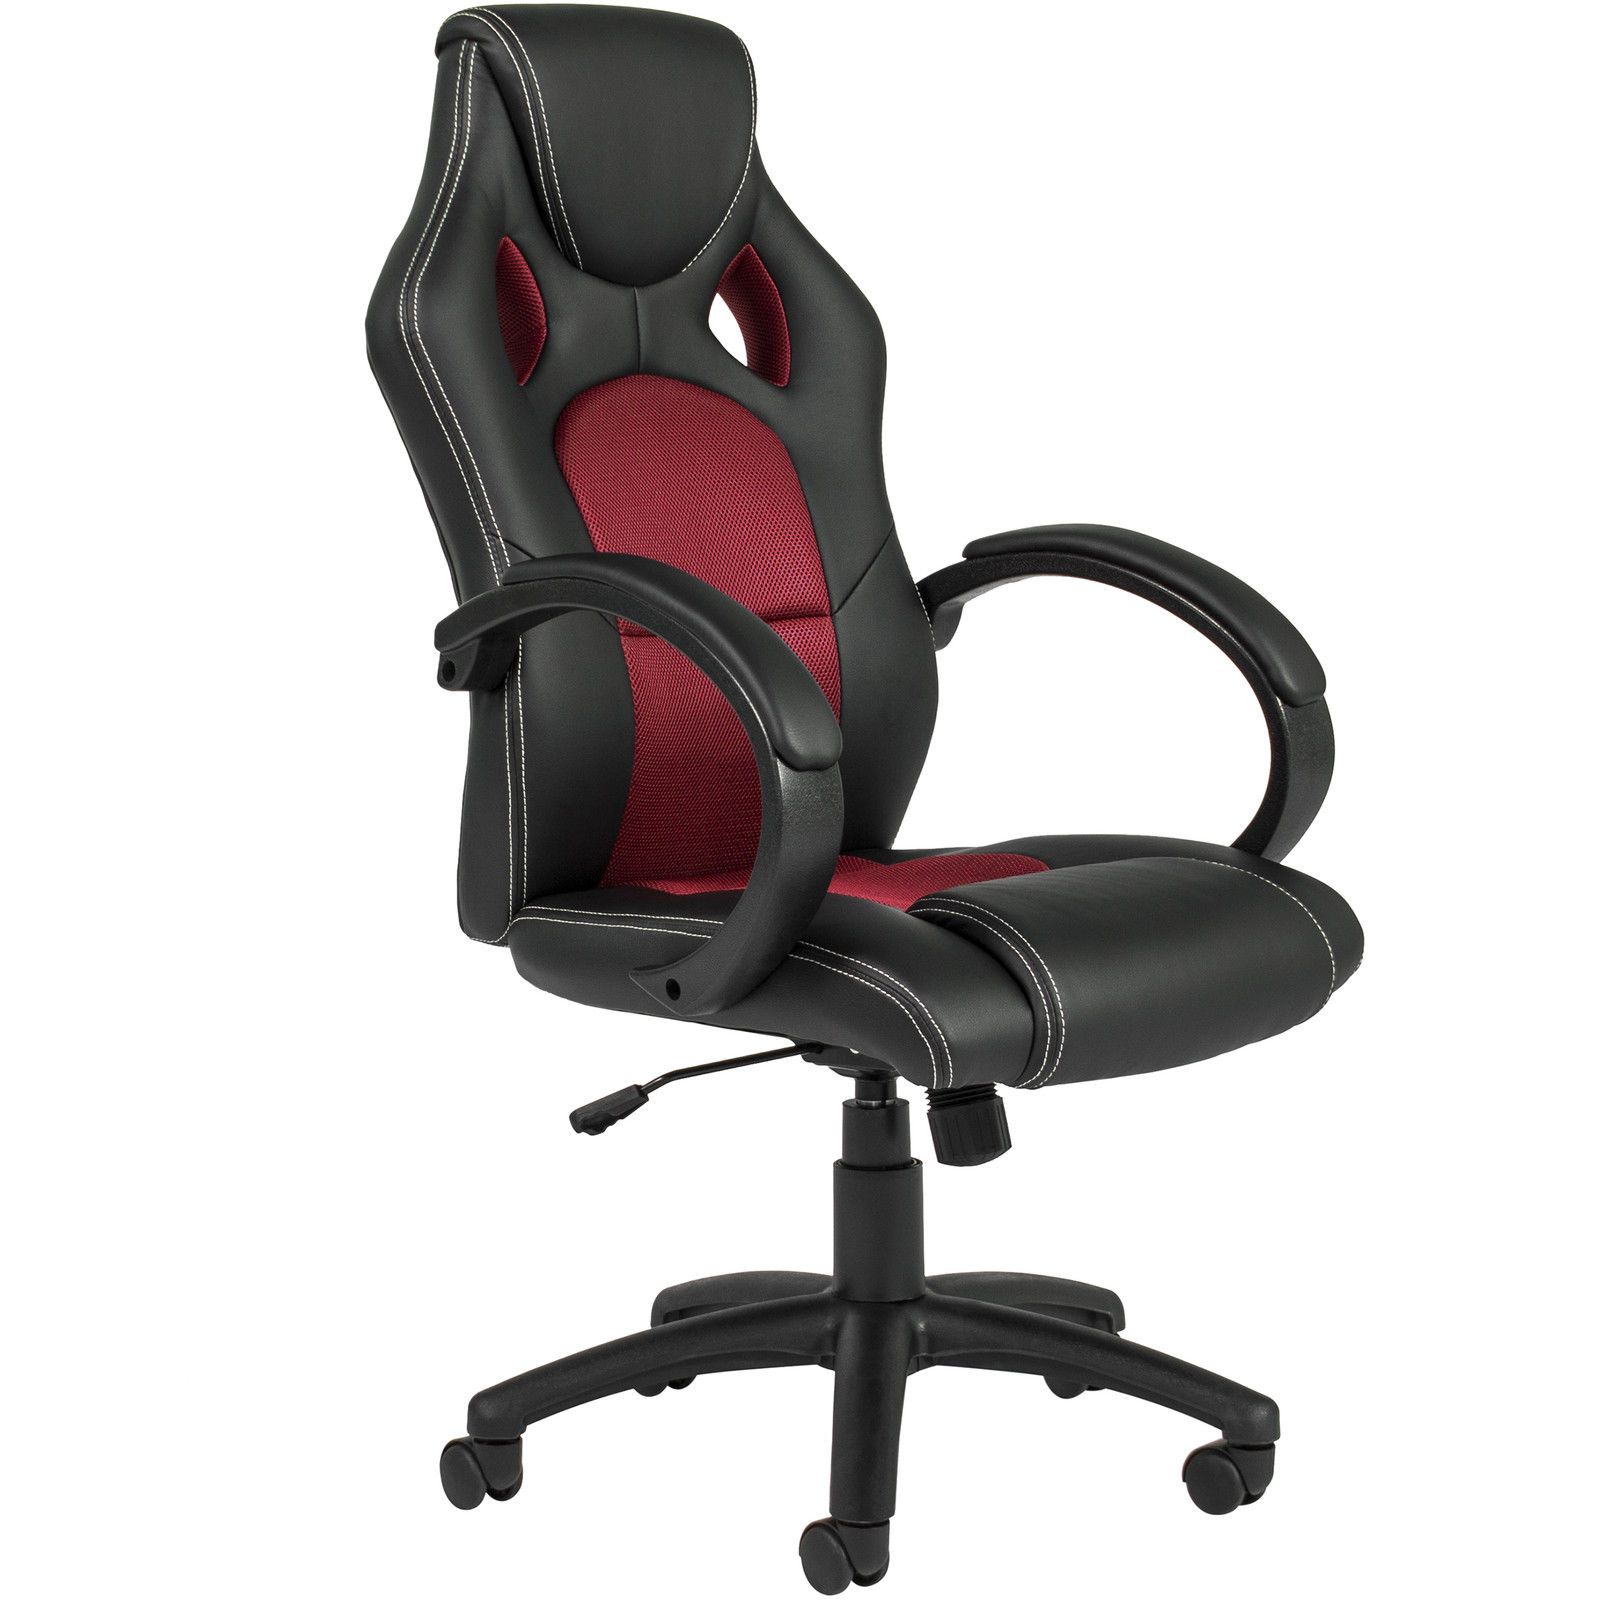 2019 Red Executive Racing Office Chair PU Leather Swivel Computer Desk